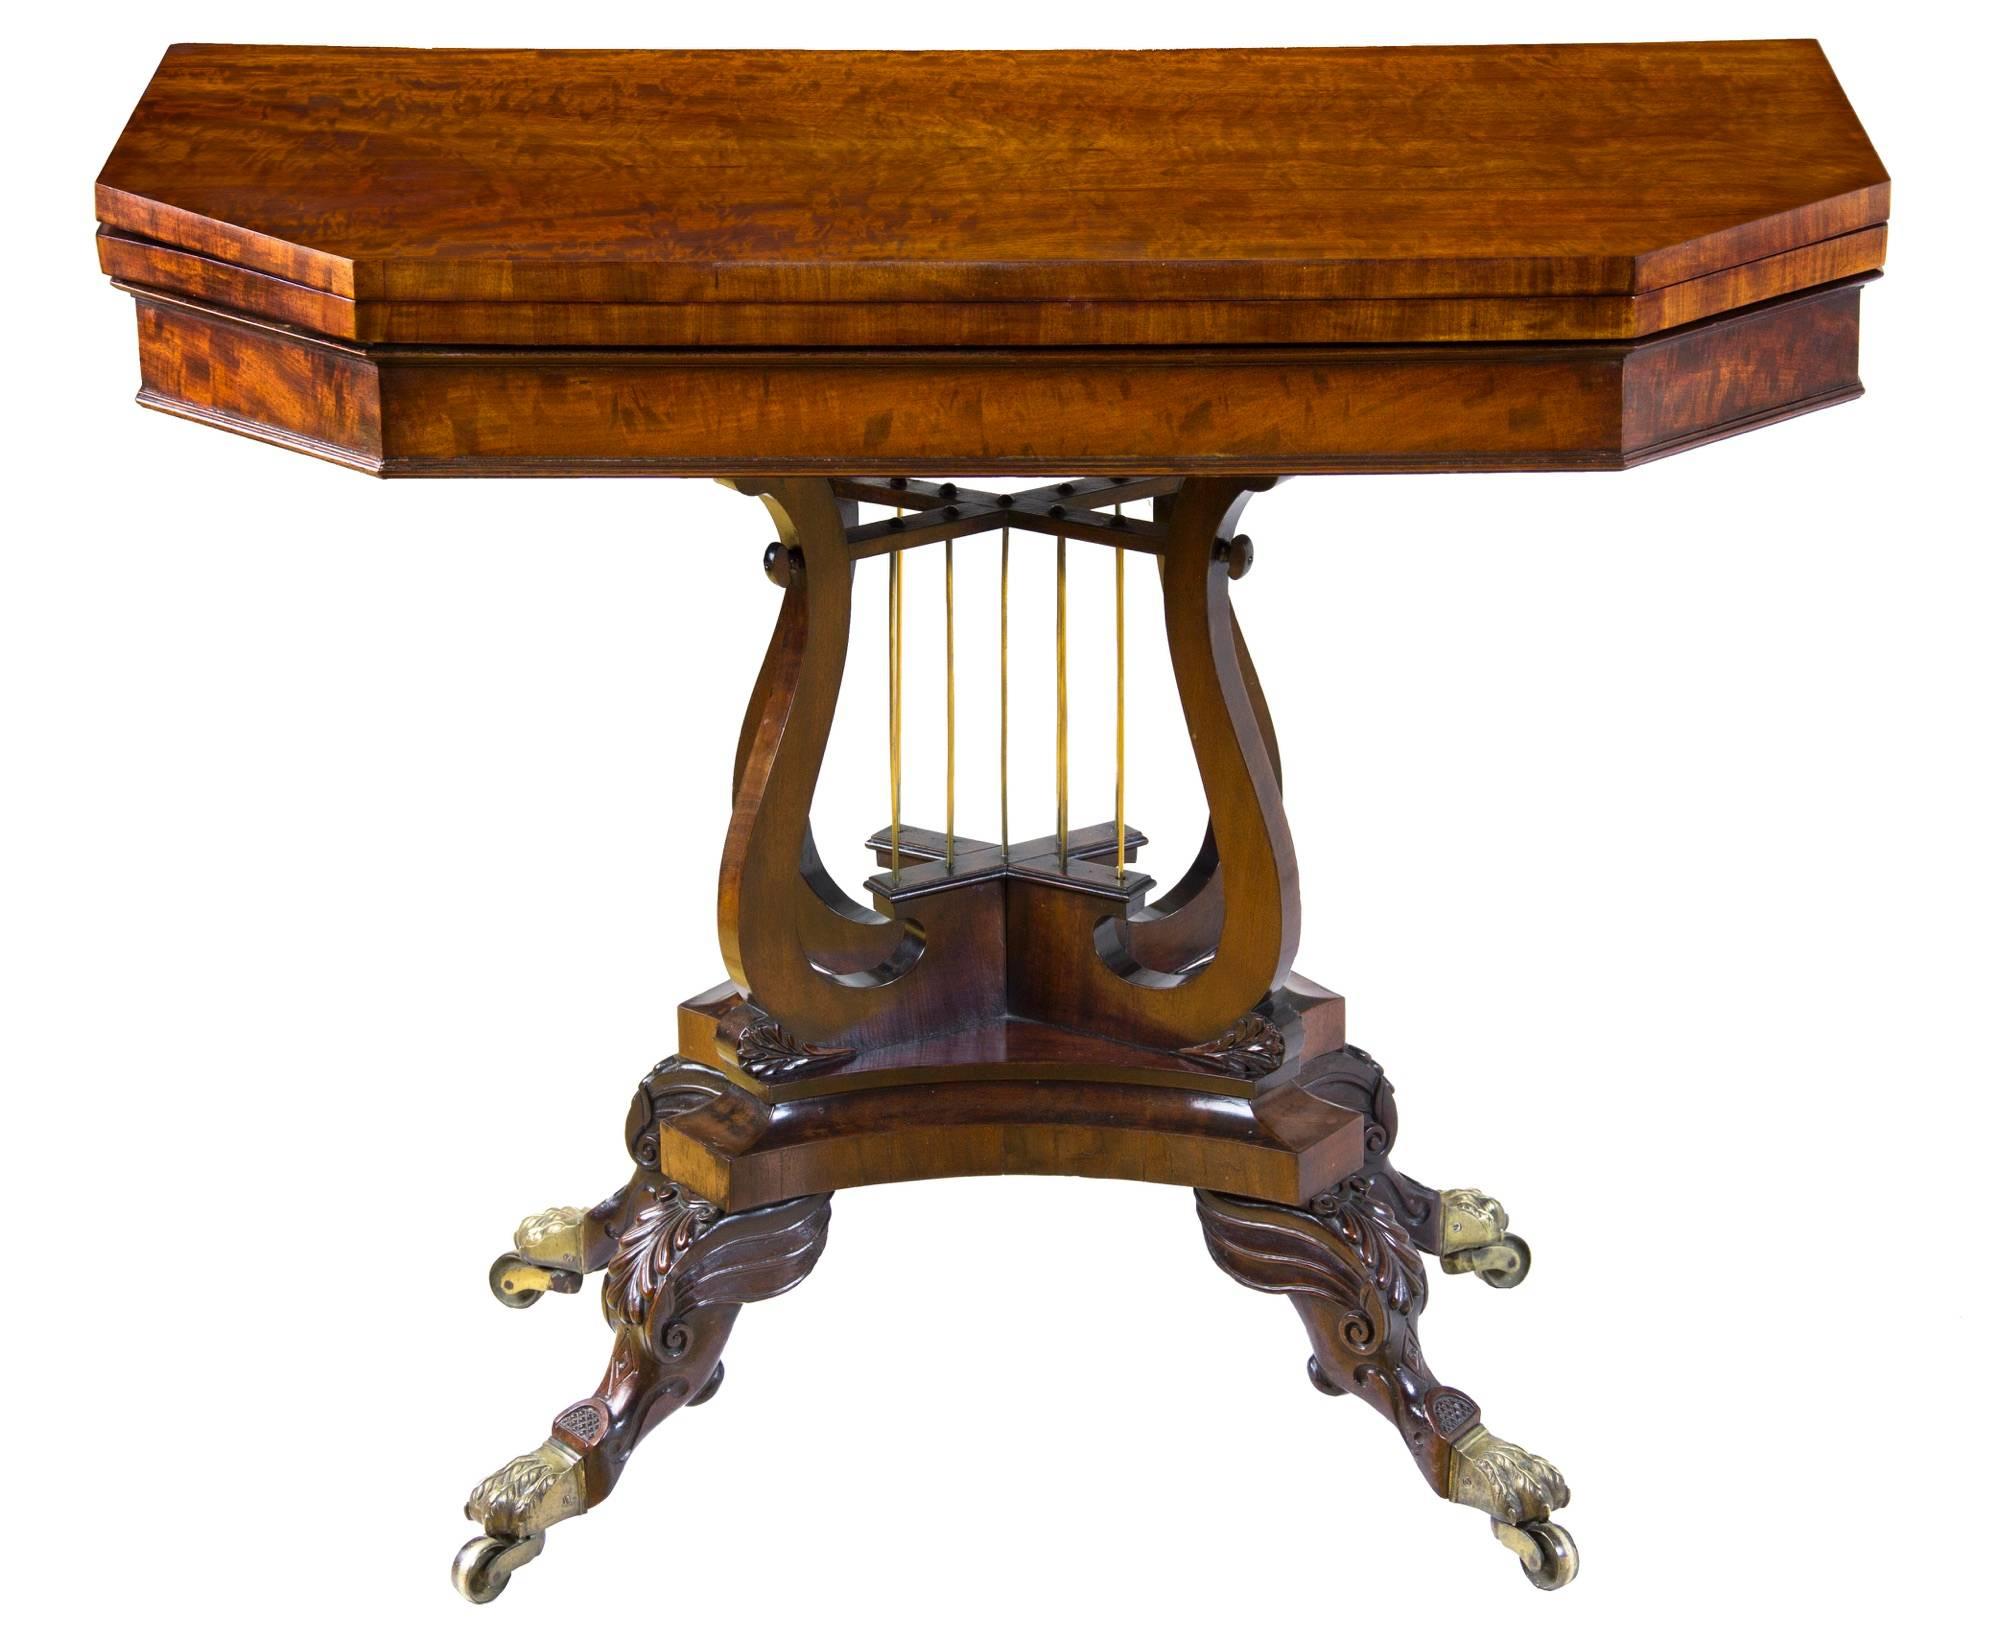 This card table is an exceptional example of American Classical design, with highly skilled carving and reminiscent of work being done in New York during the late Phyfe period and the work done in New York by the Vose makers, etc.

Note the